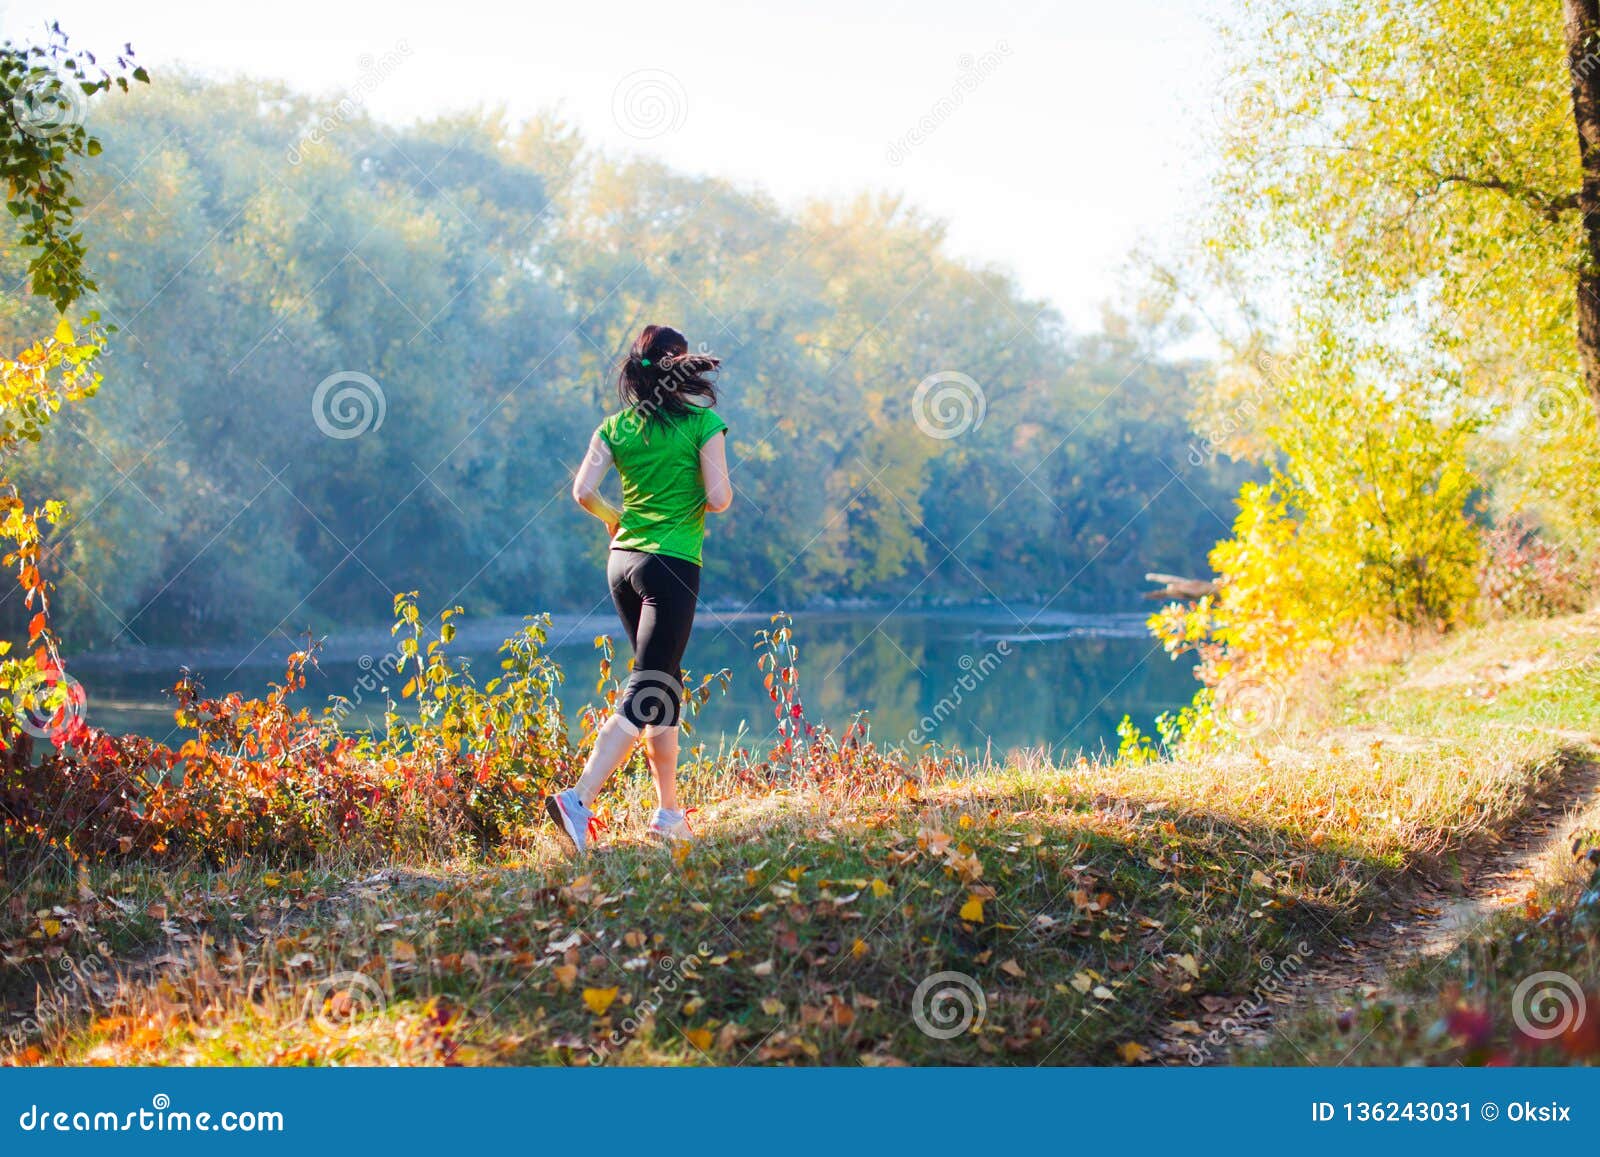 Backview of Woman in Motion Near the Forest River Stock Image - Image ...